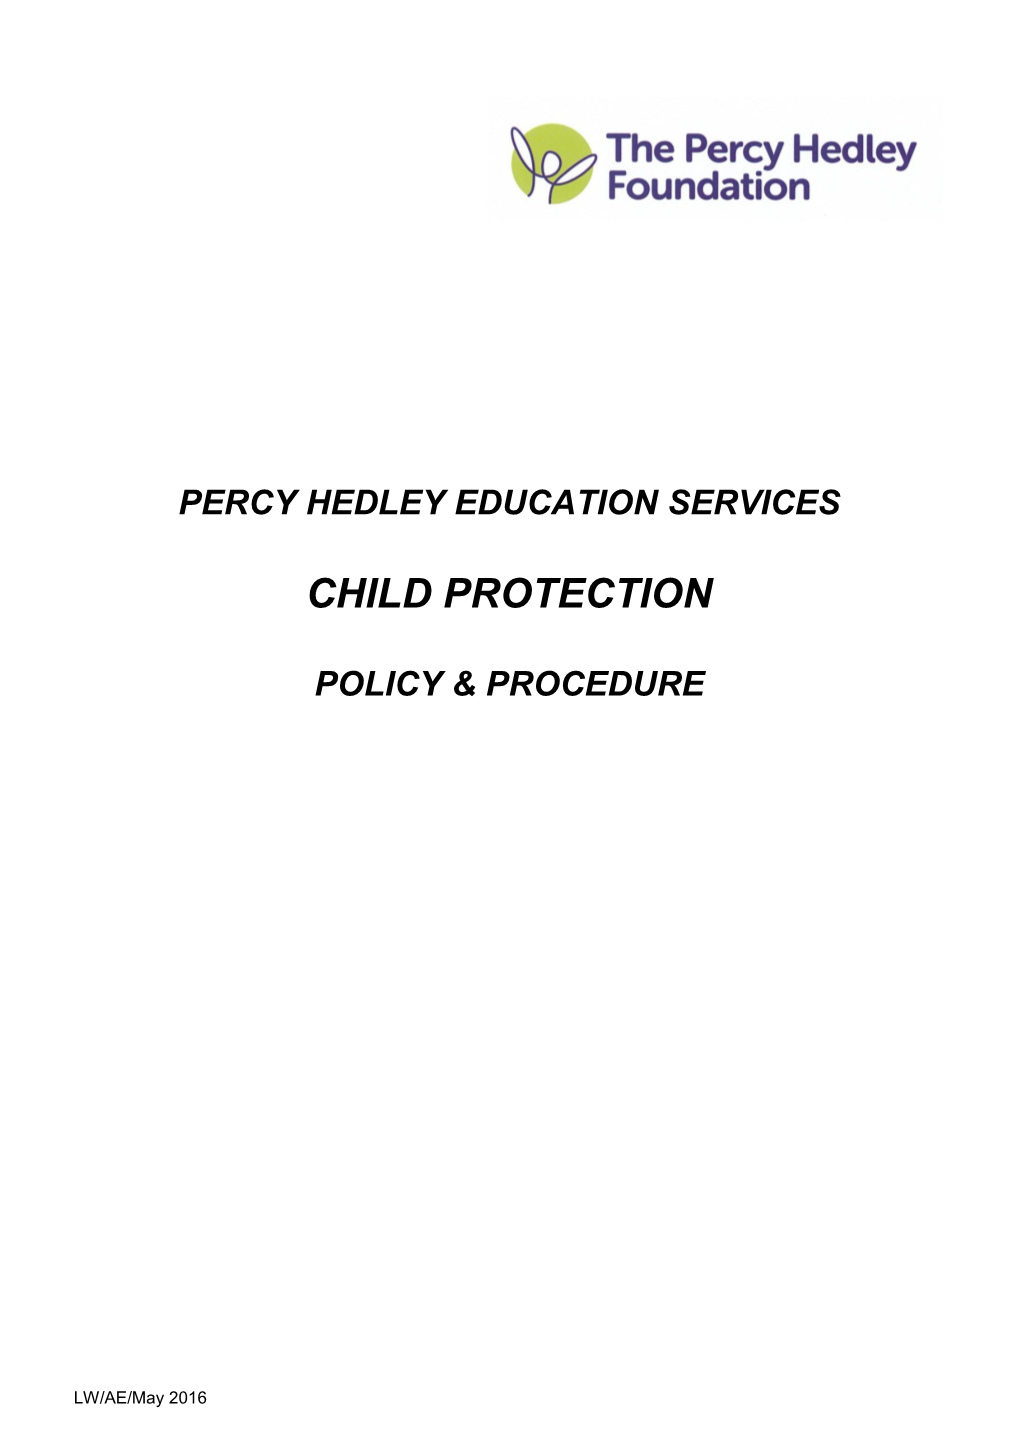 Percy Hedley Education Services